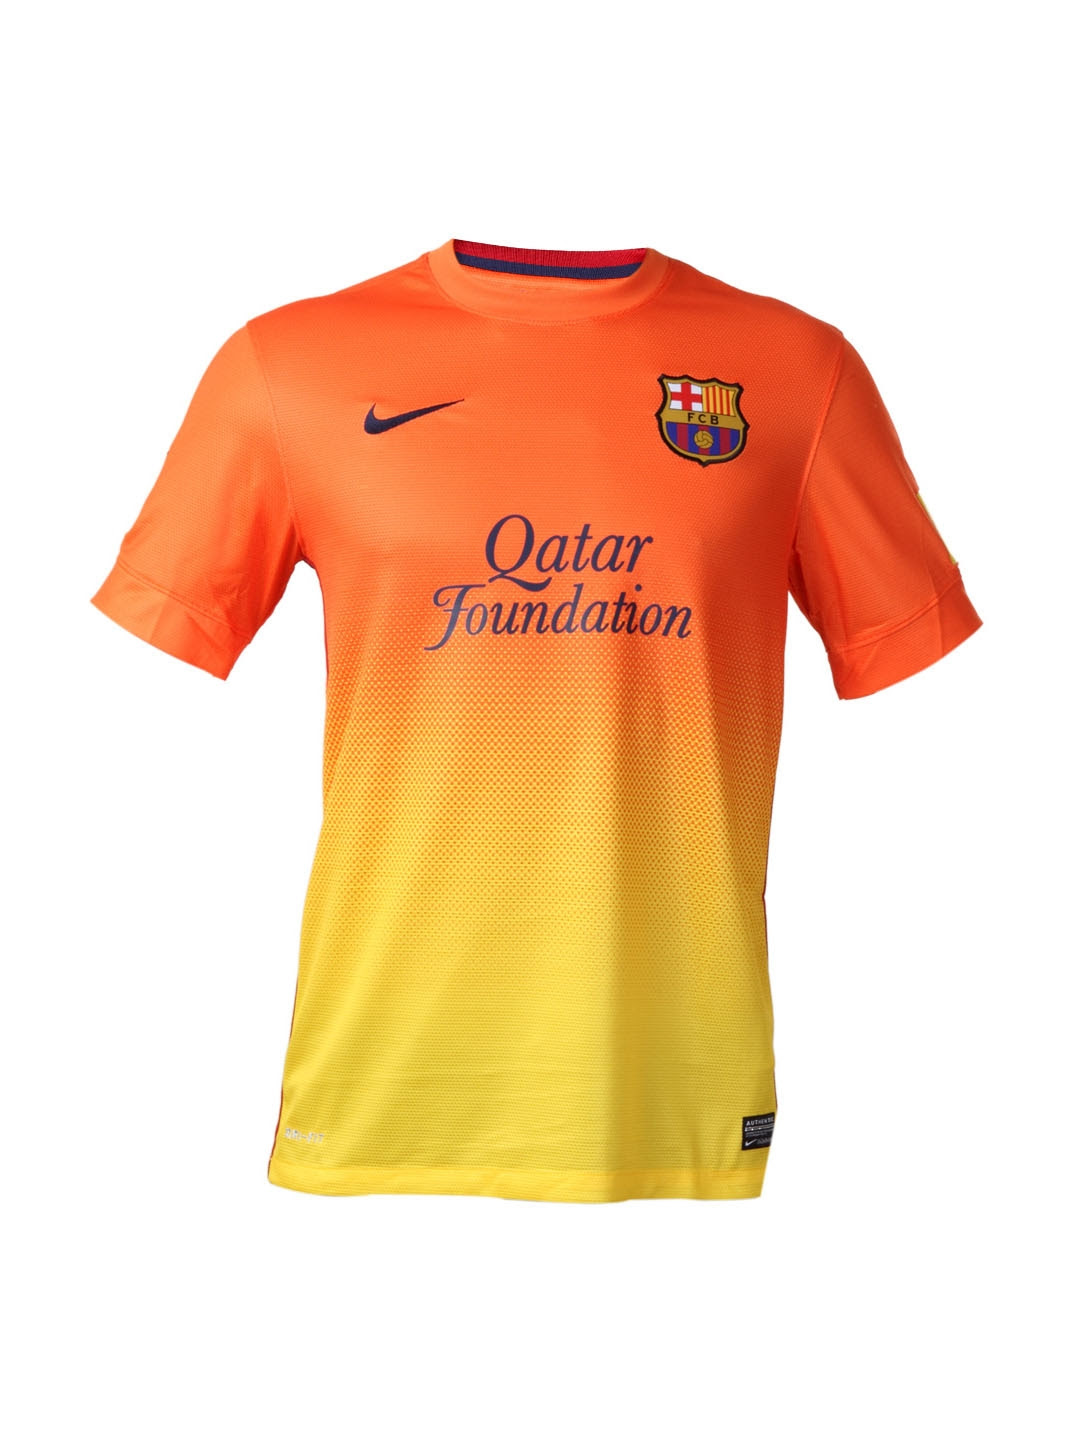 Why Would Someone Want to Buy a Barcelona Jersey?